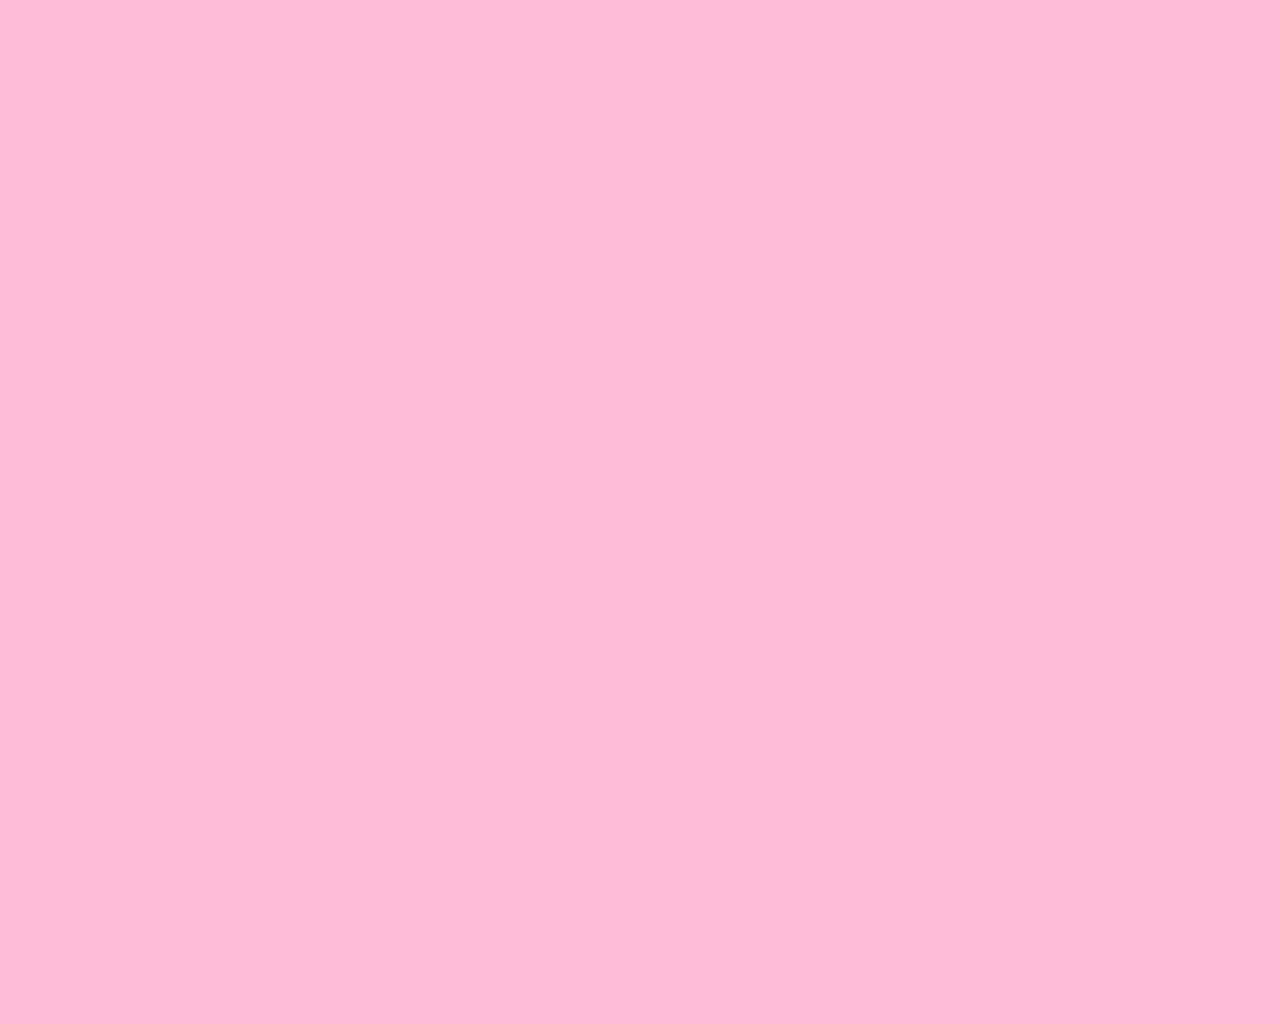 Pink Cotton Candy Background Images Pictures   Becuo